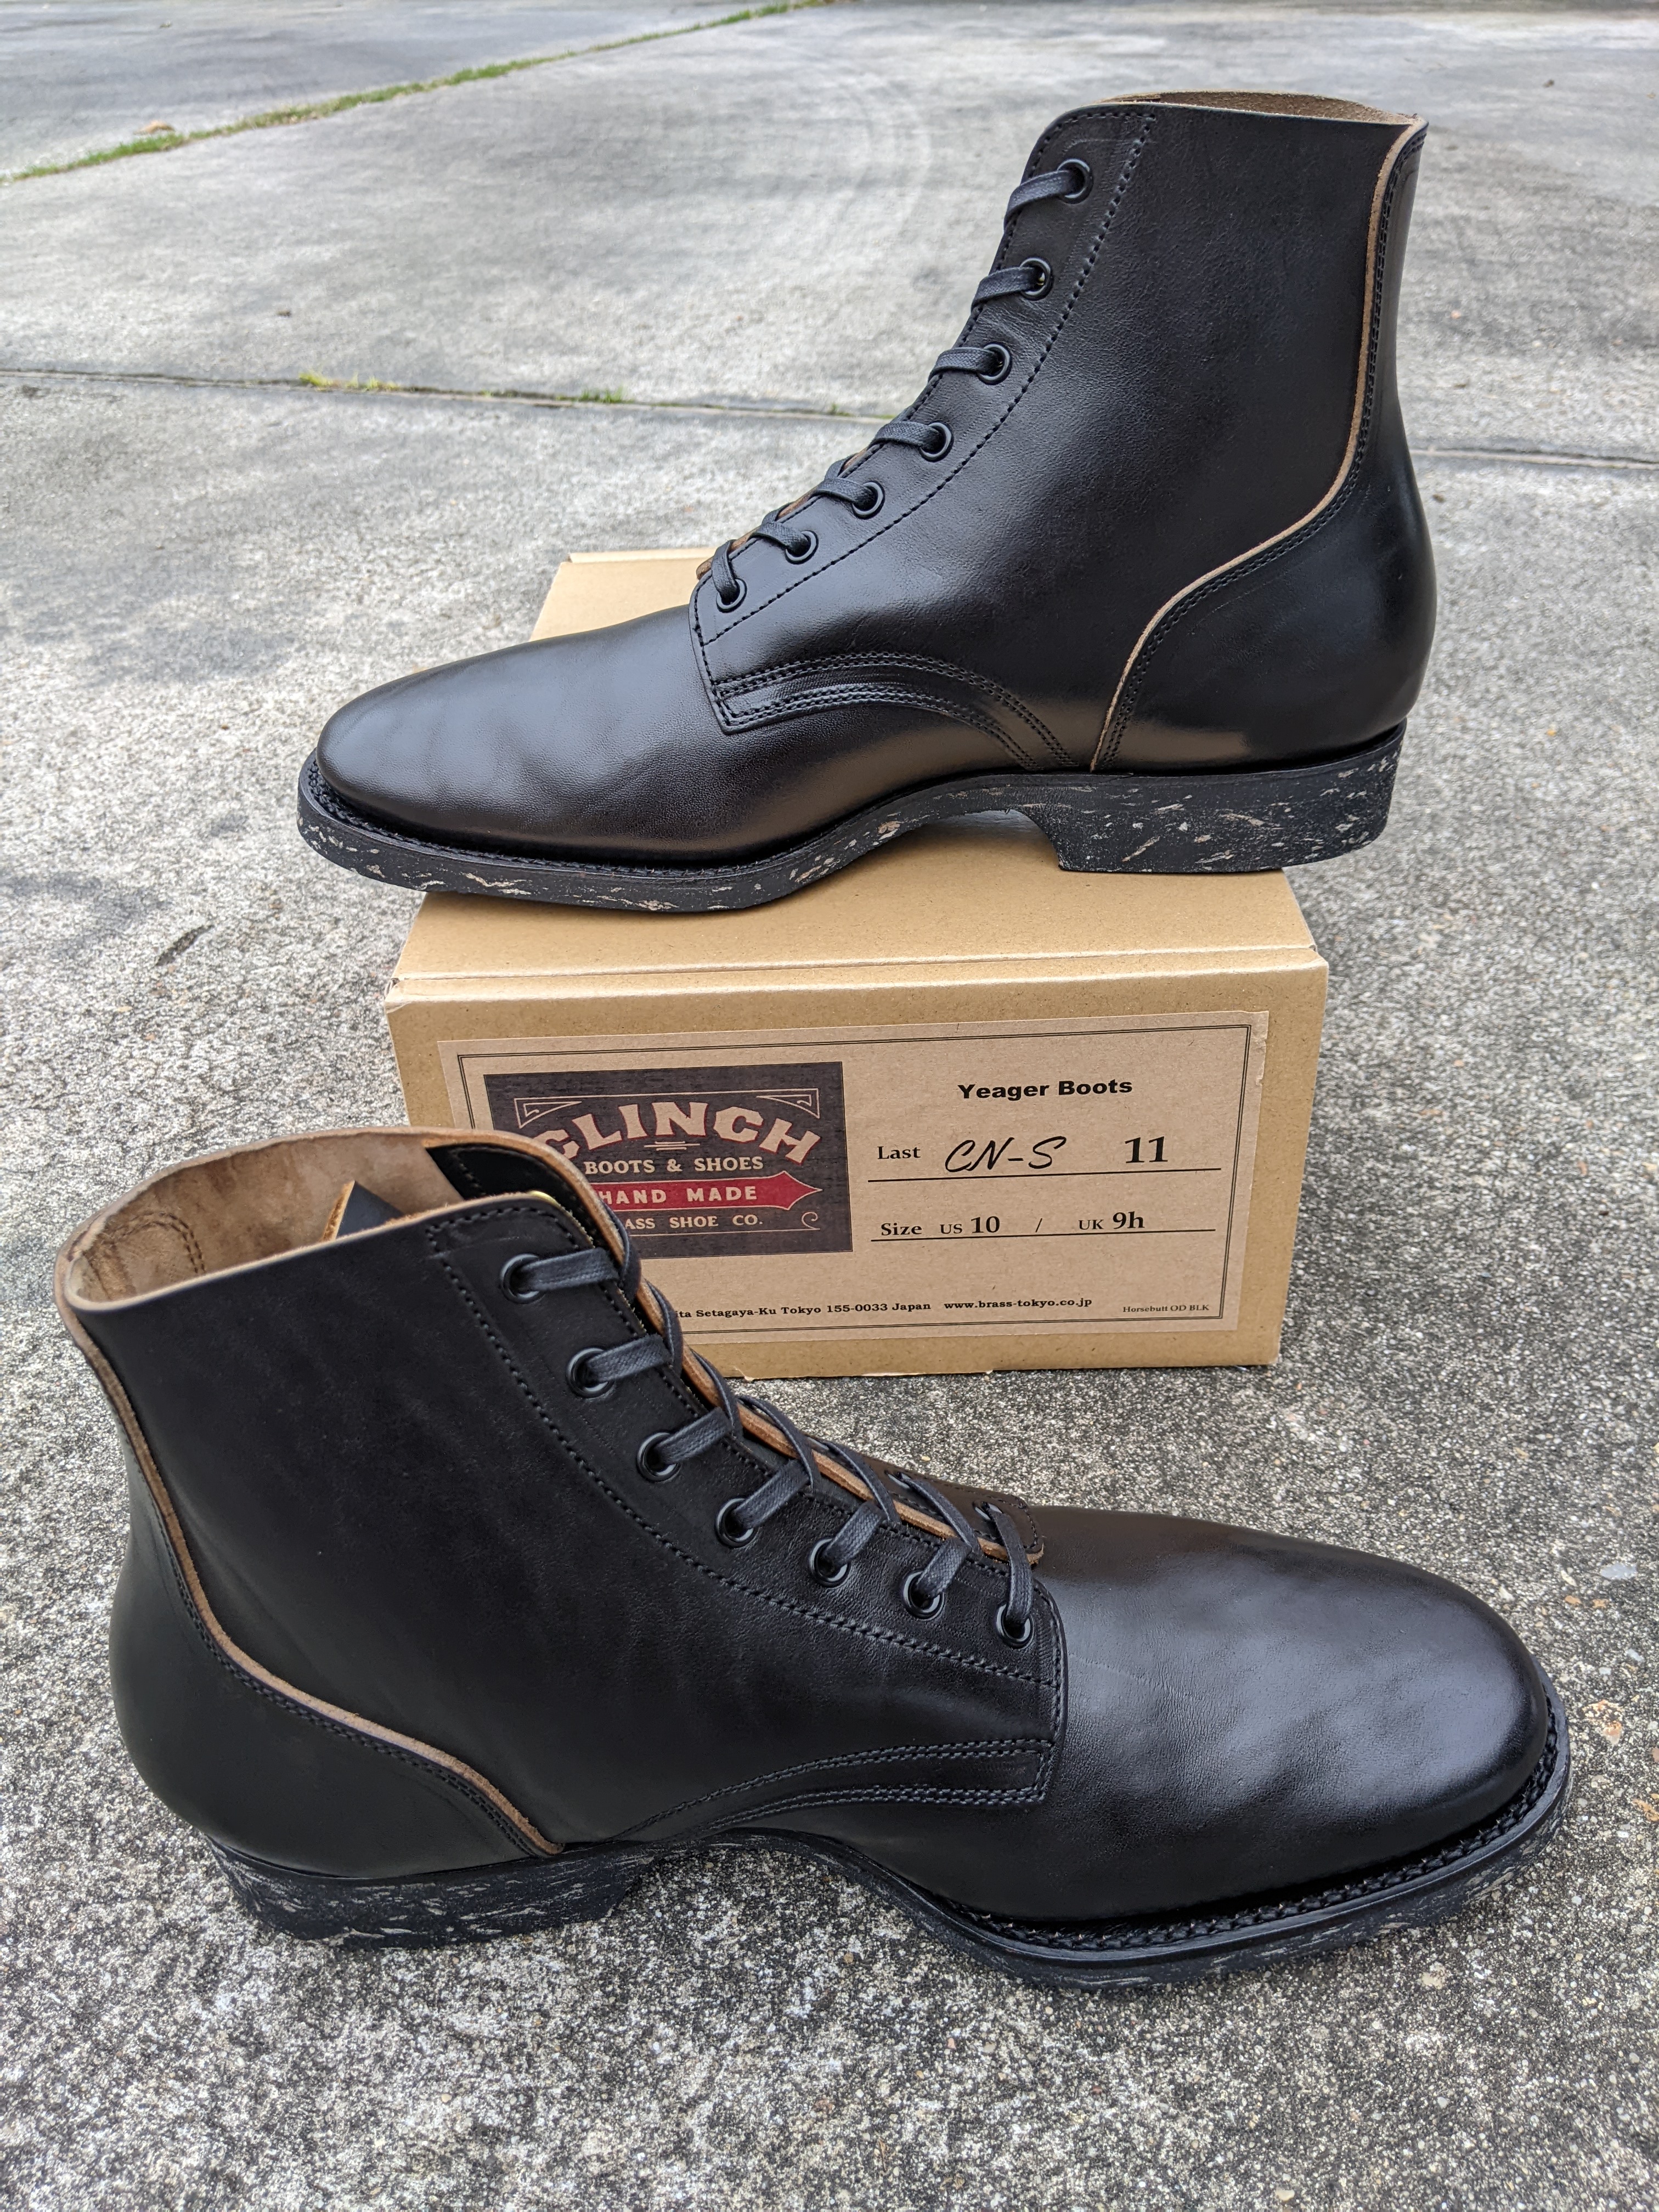 Clinch Black Overdyed Horsebutt Yeager Boots CN-S Clinch 11